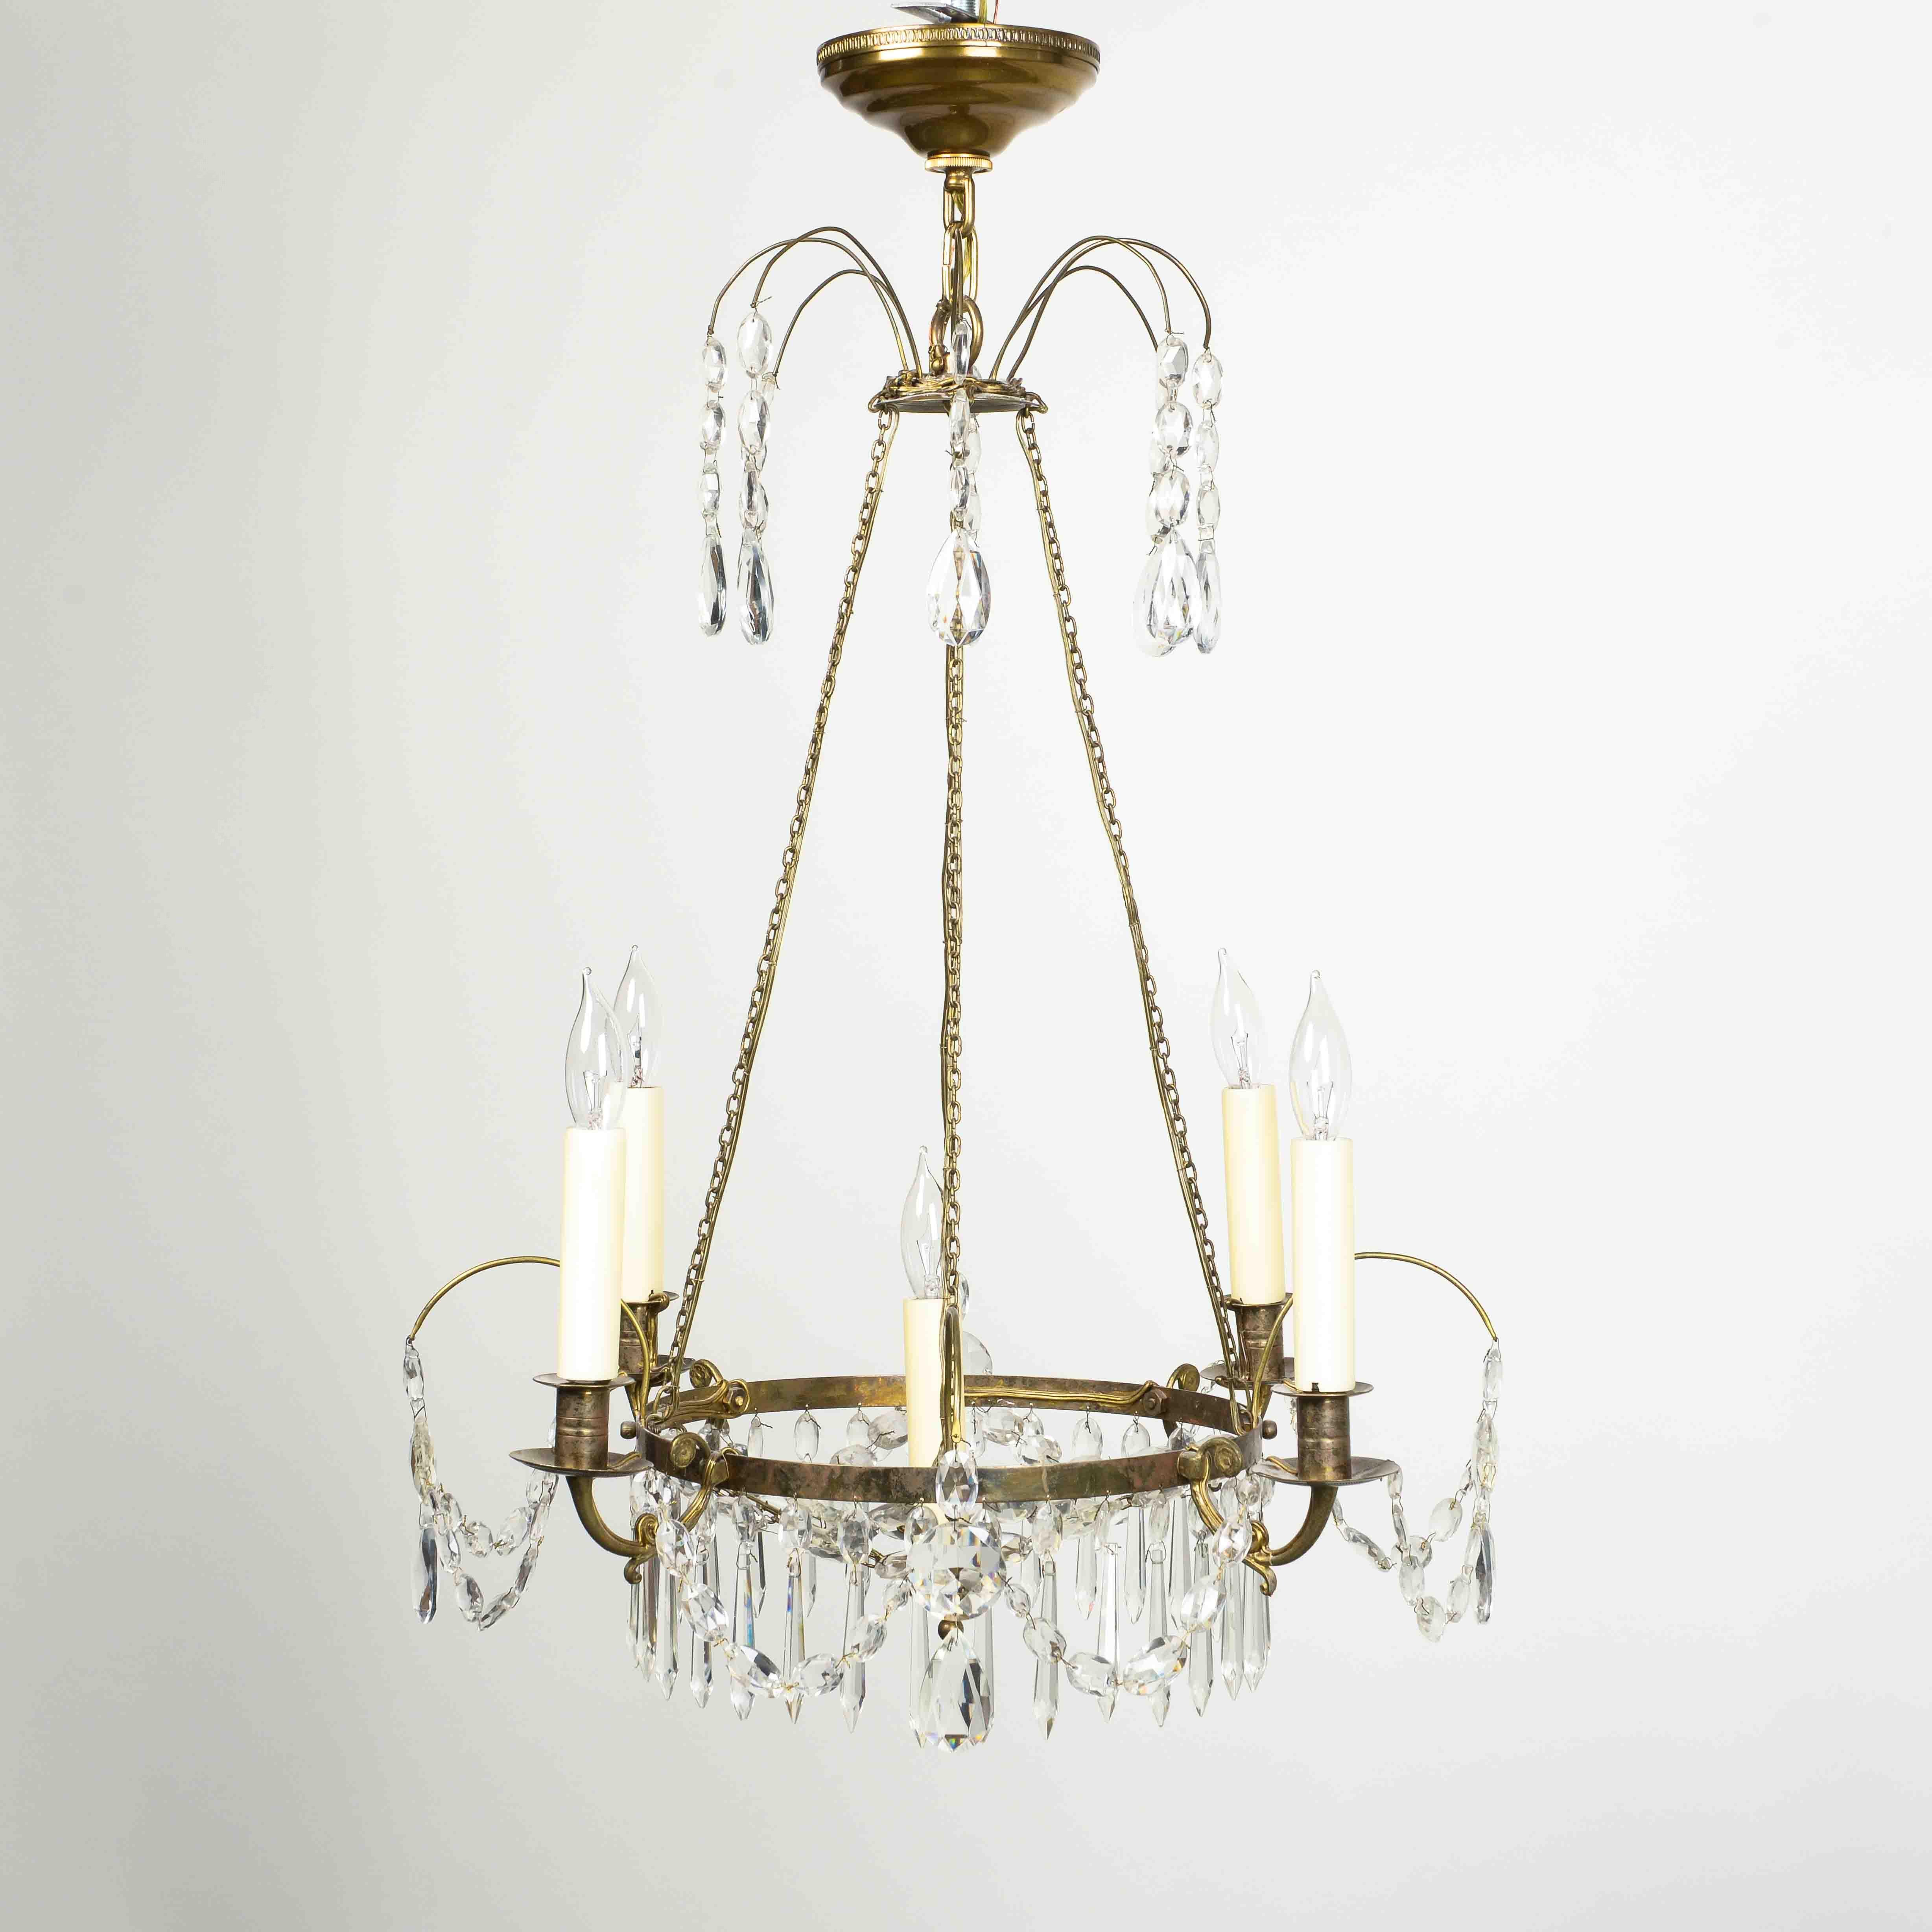 Swedish Empire Cut Crystal and Bronze Five-Light Chandelier In Excellent Condition For Sale In New York, NY